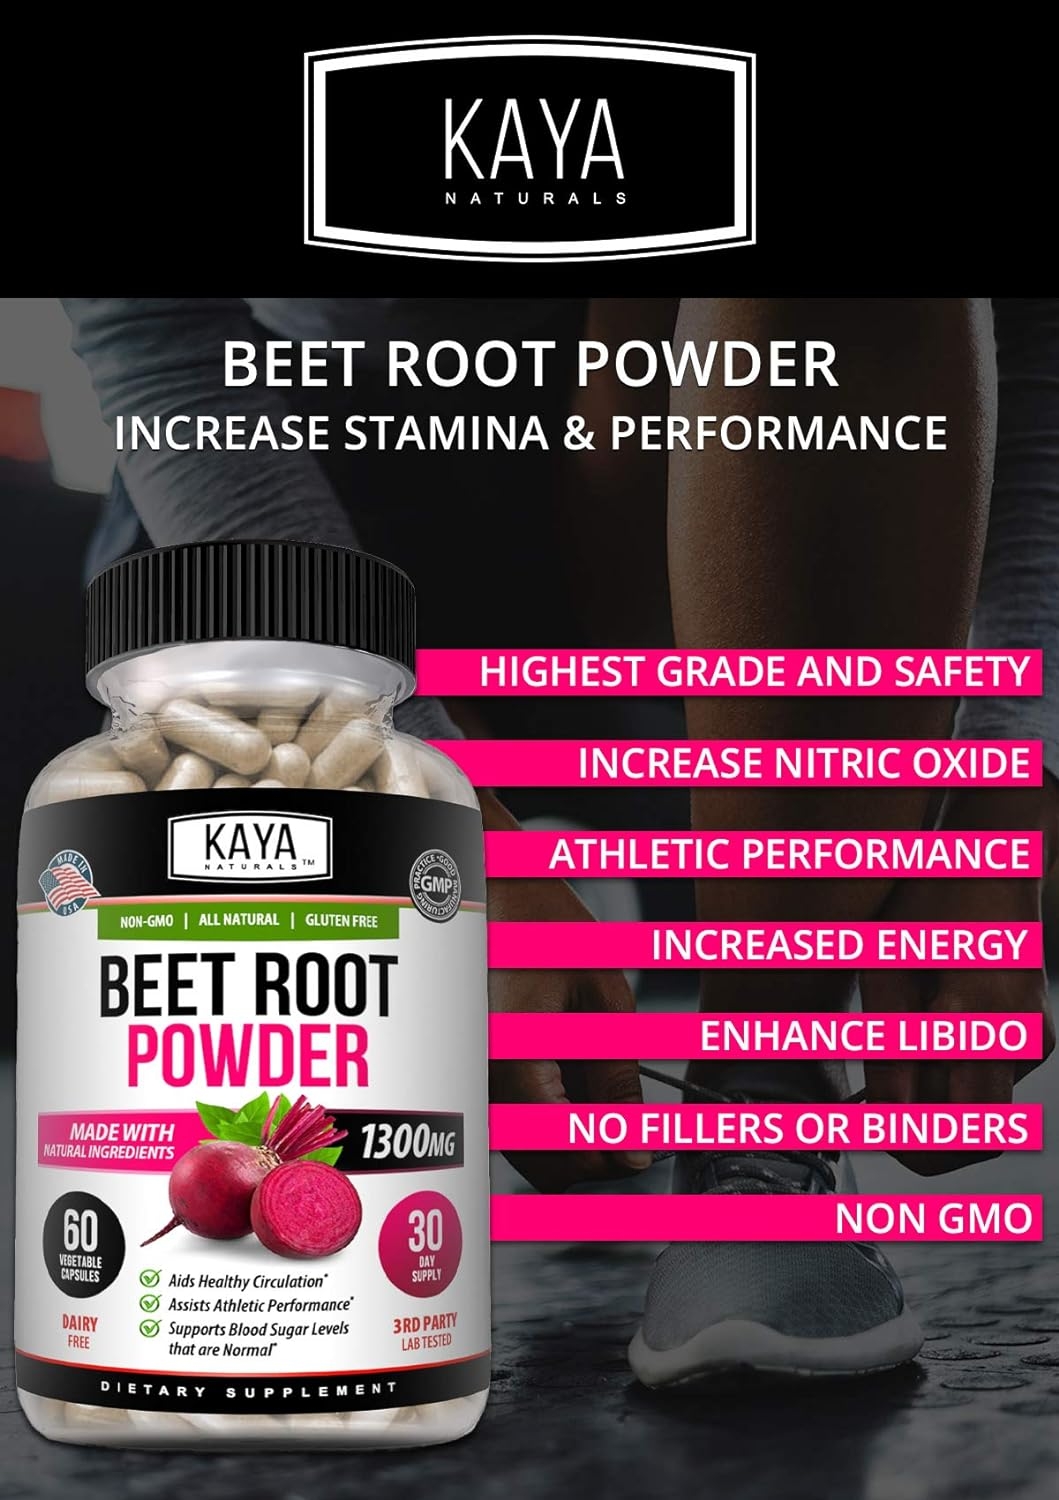 Kaya Naturals Organic Beet Root Powder 1300mg Per Serving 60 Veggie Capsules Supports Athletic Performance Aids in Healthy Circulation